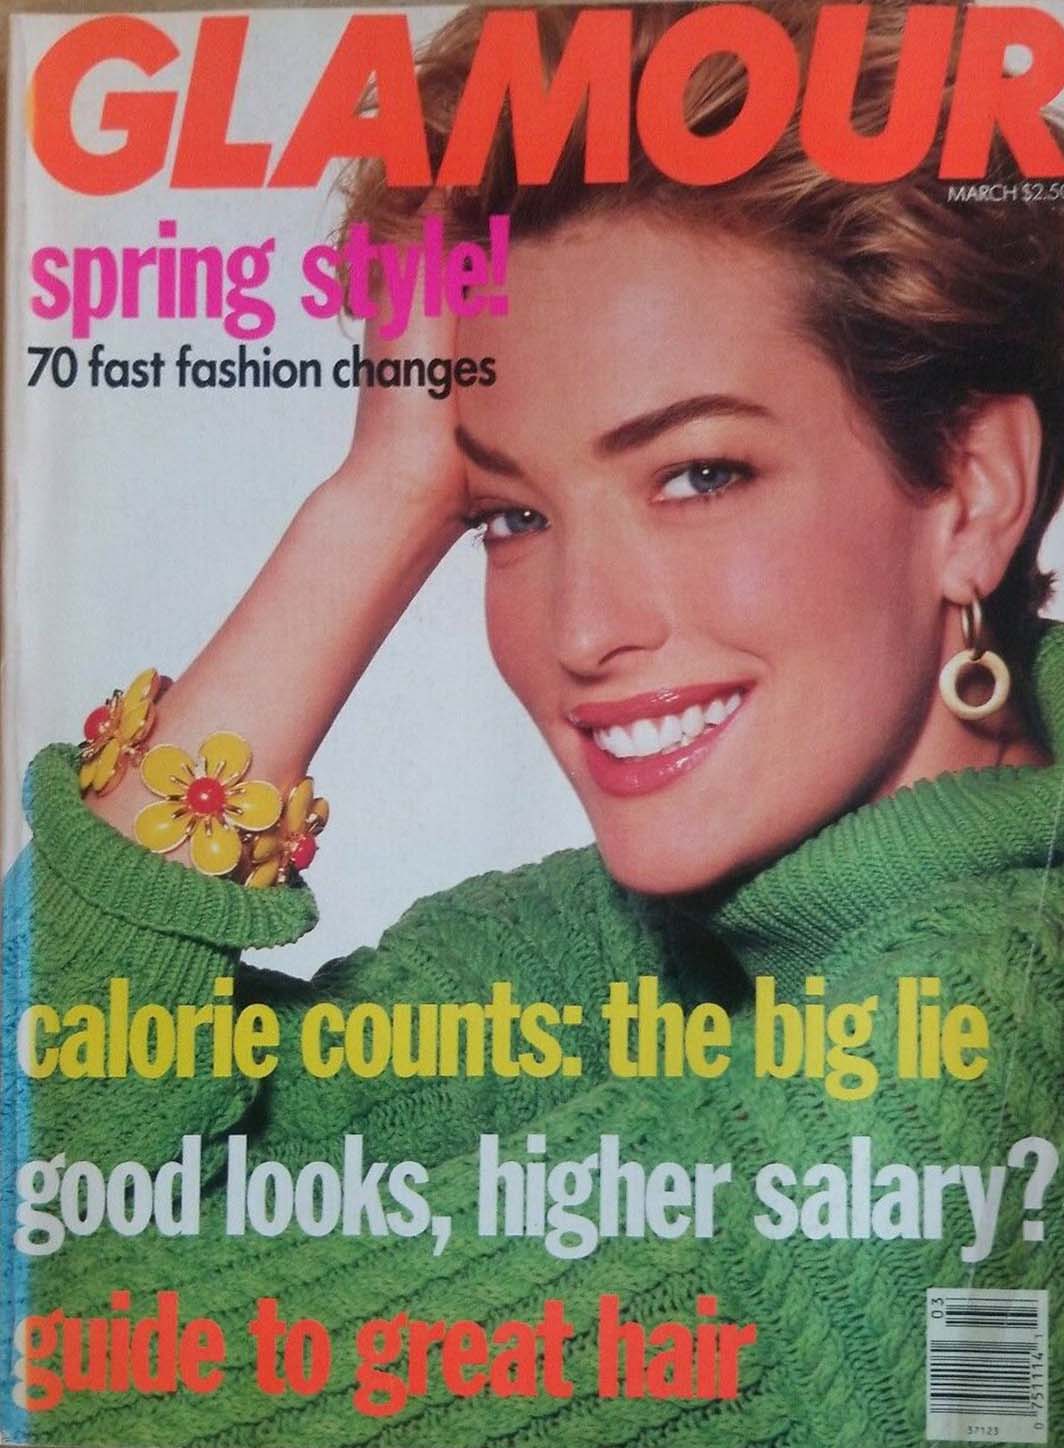 Glamour March 1991 magazine back issue Glamour magizine back copy Glamour March 1991 Womens Magazine Back Issue Published by Conde Nast Publications. Spring Style! 70 Fast Fashion Changes.